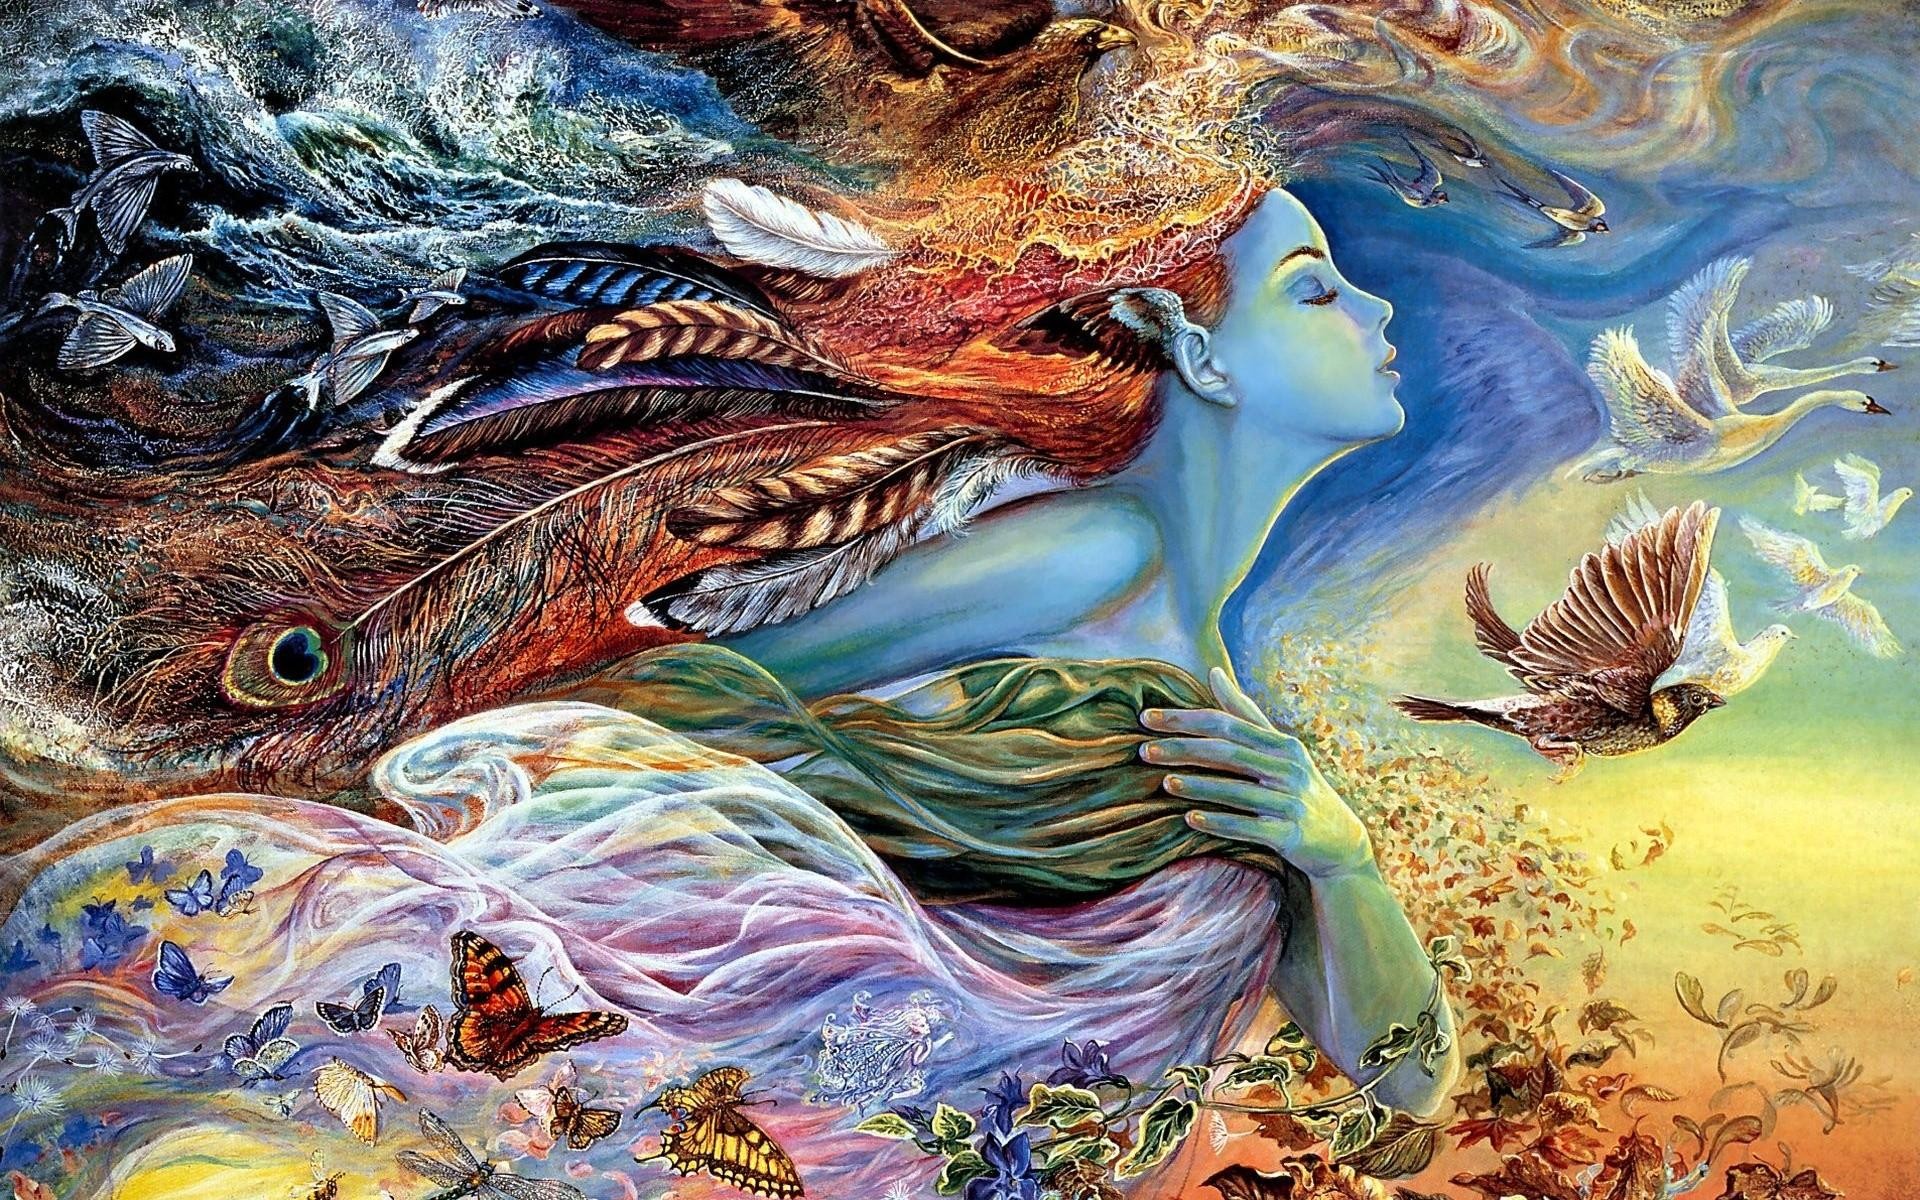 Nature Woman by Josephine Wall